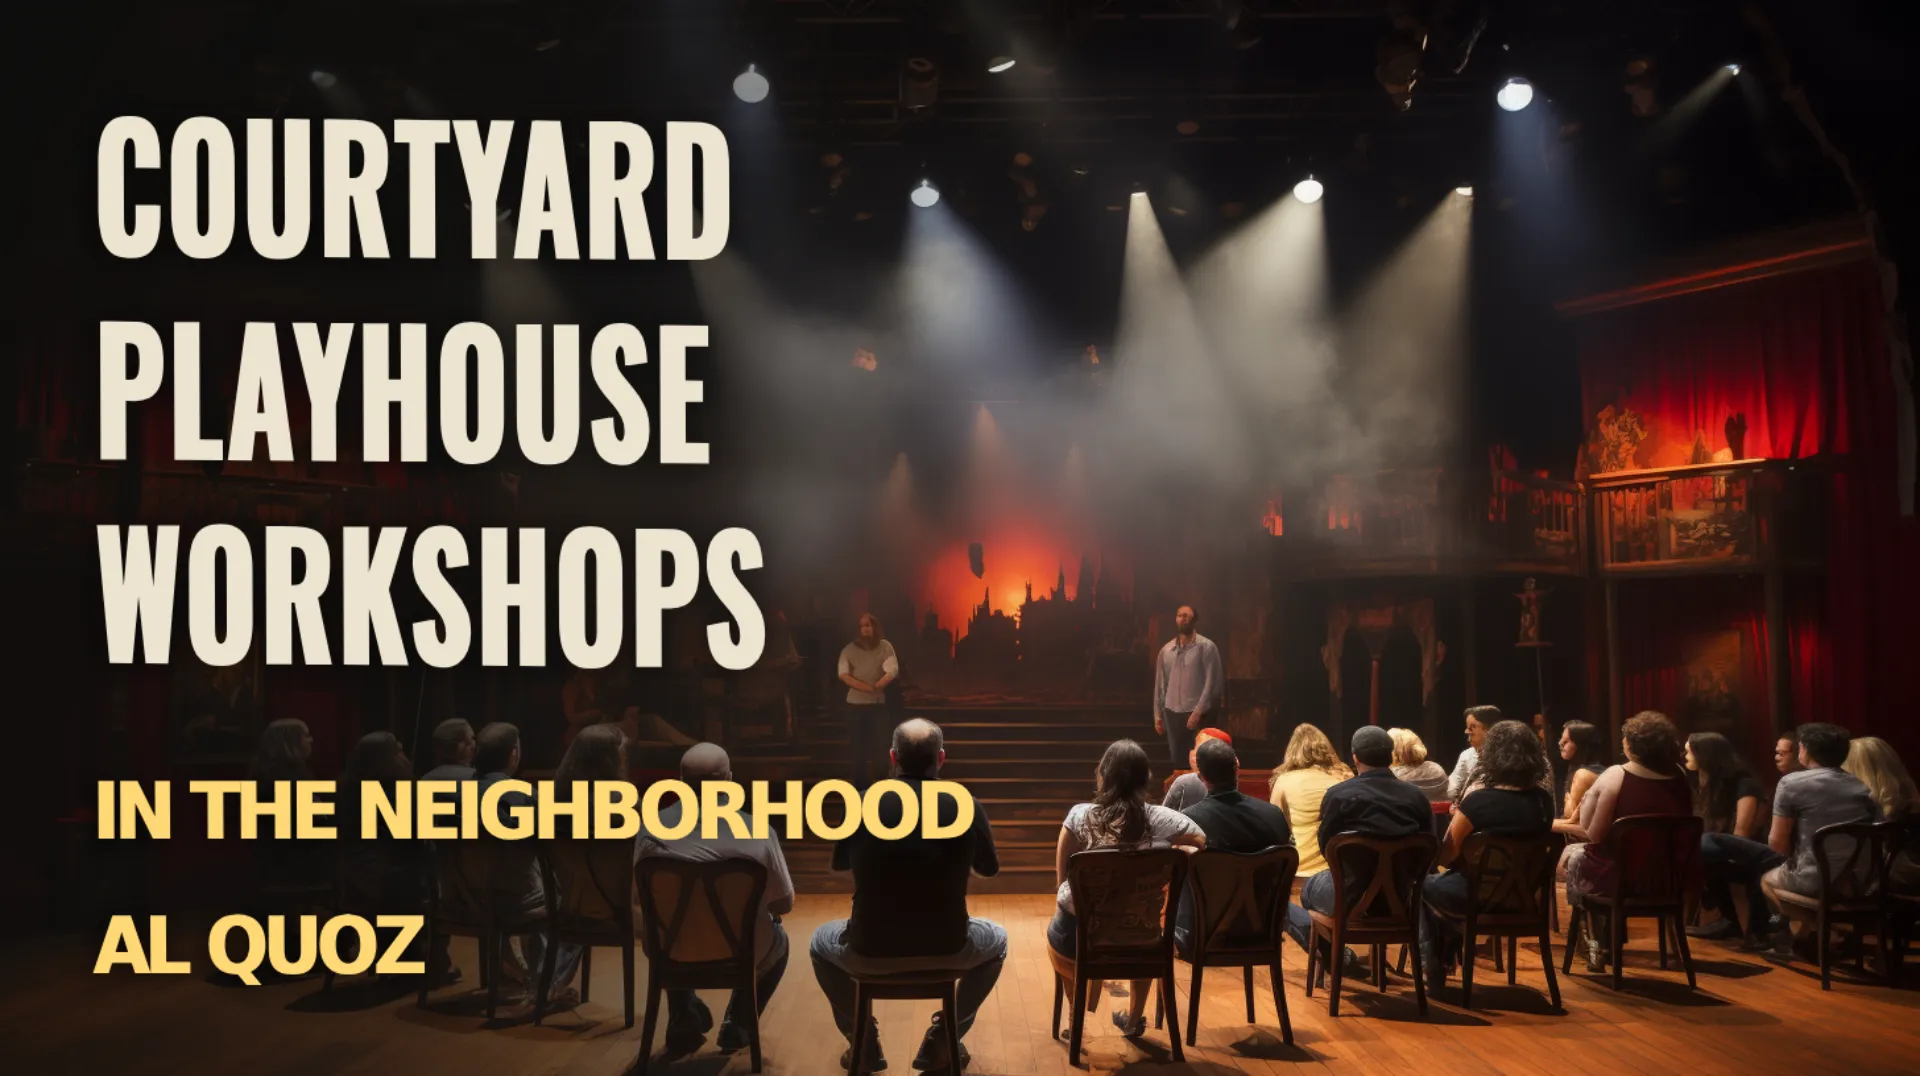 Unlock your creativity with Courtyard Playhouse Workshops, where artistic expression takes center stage